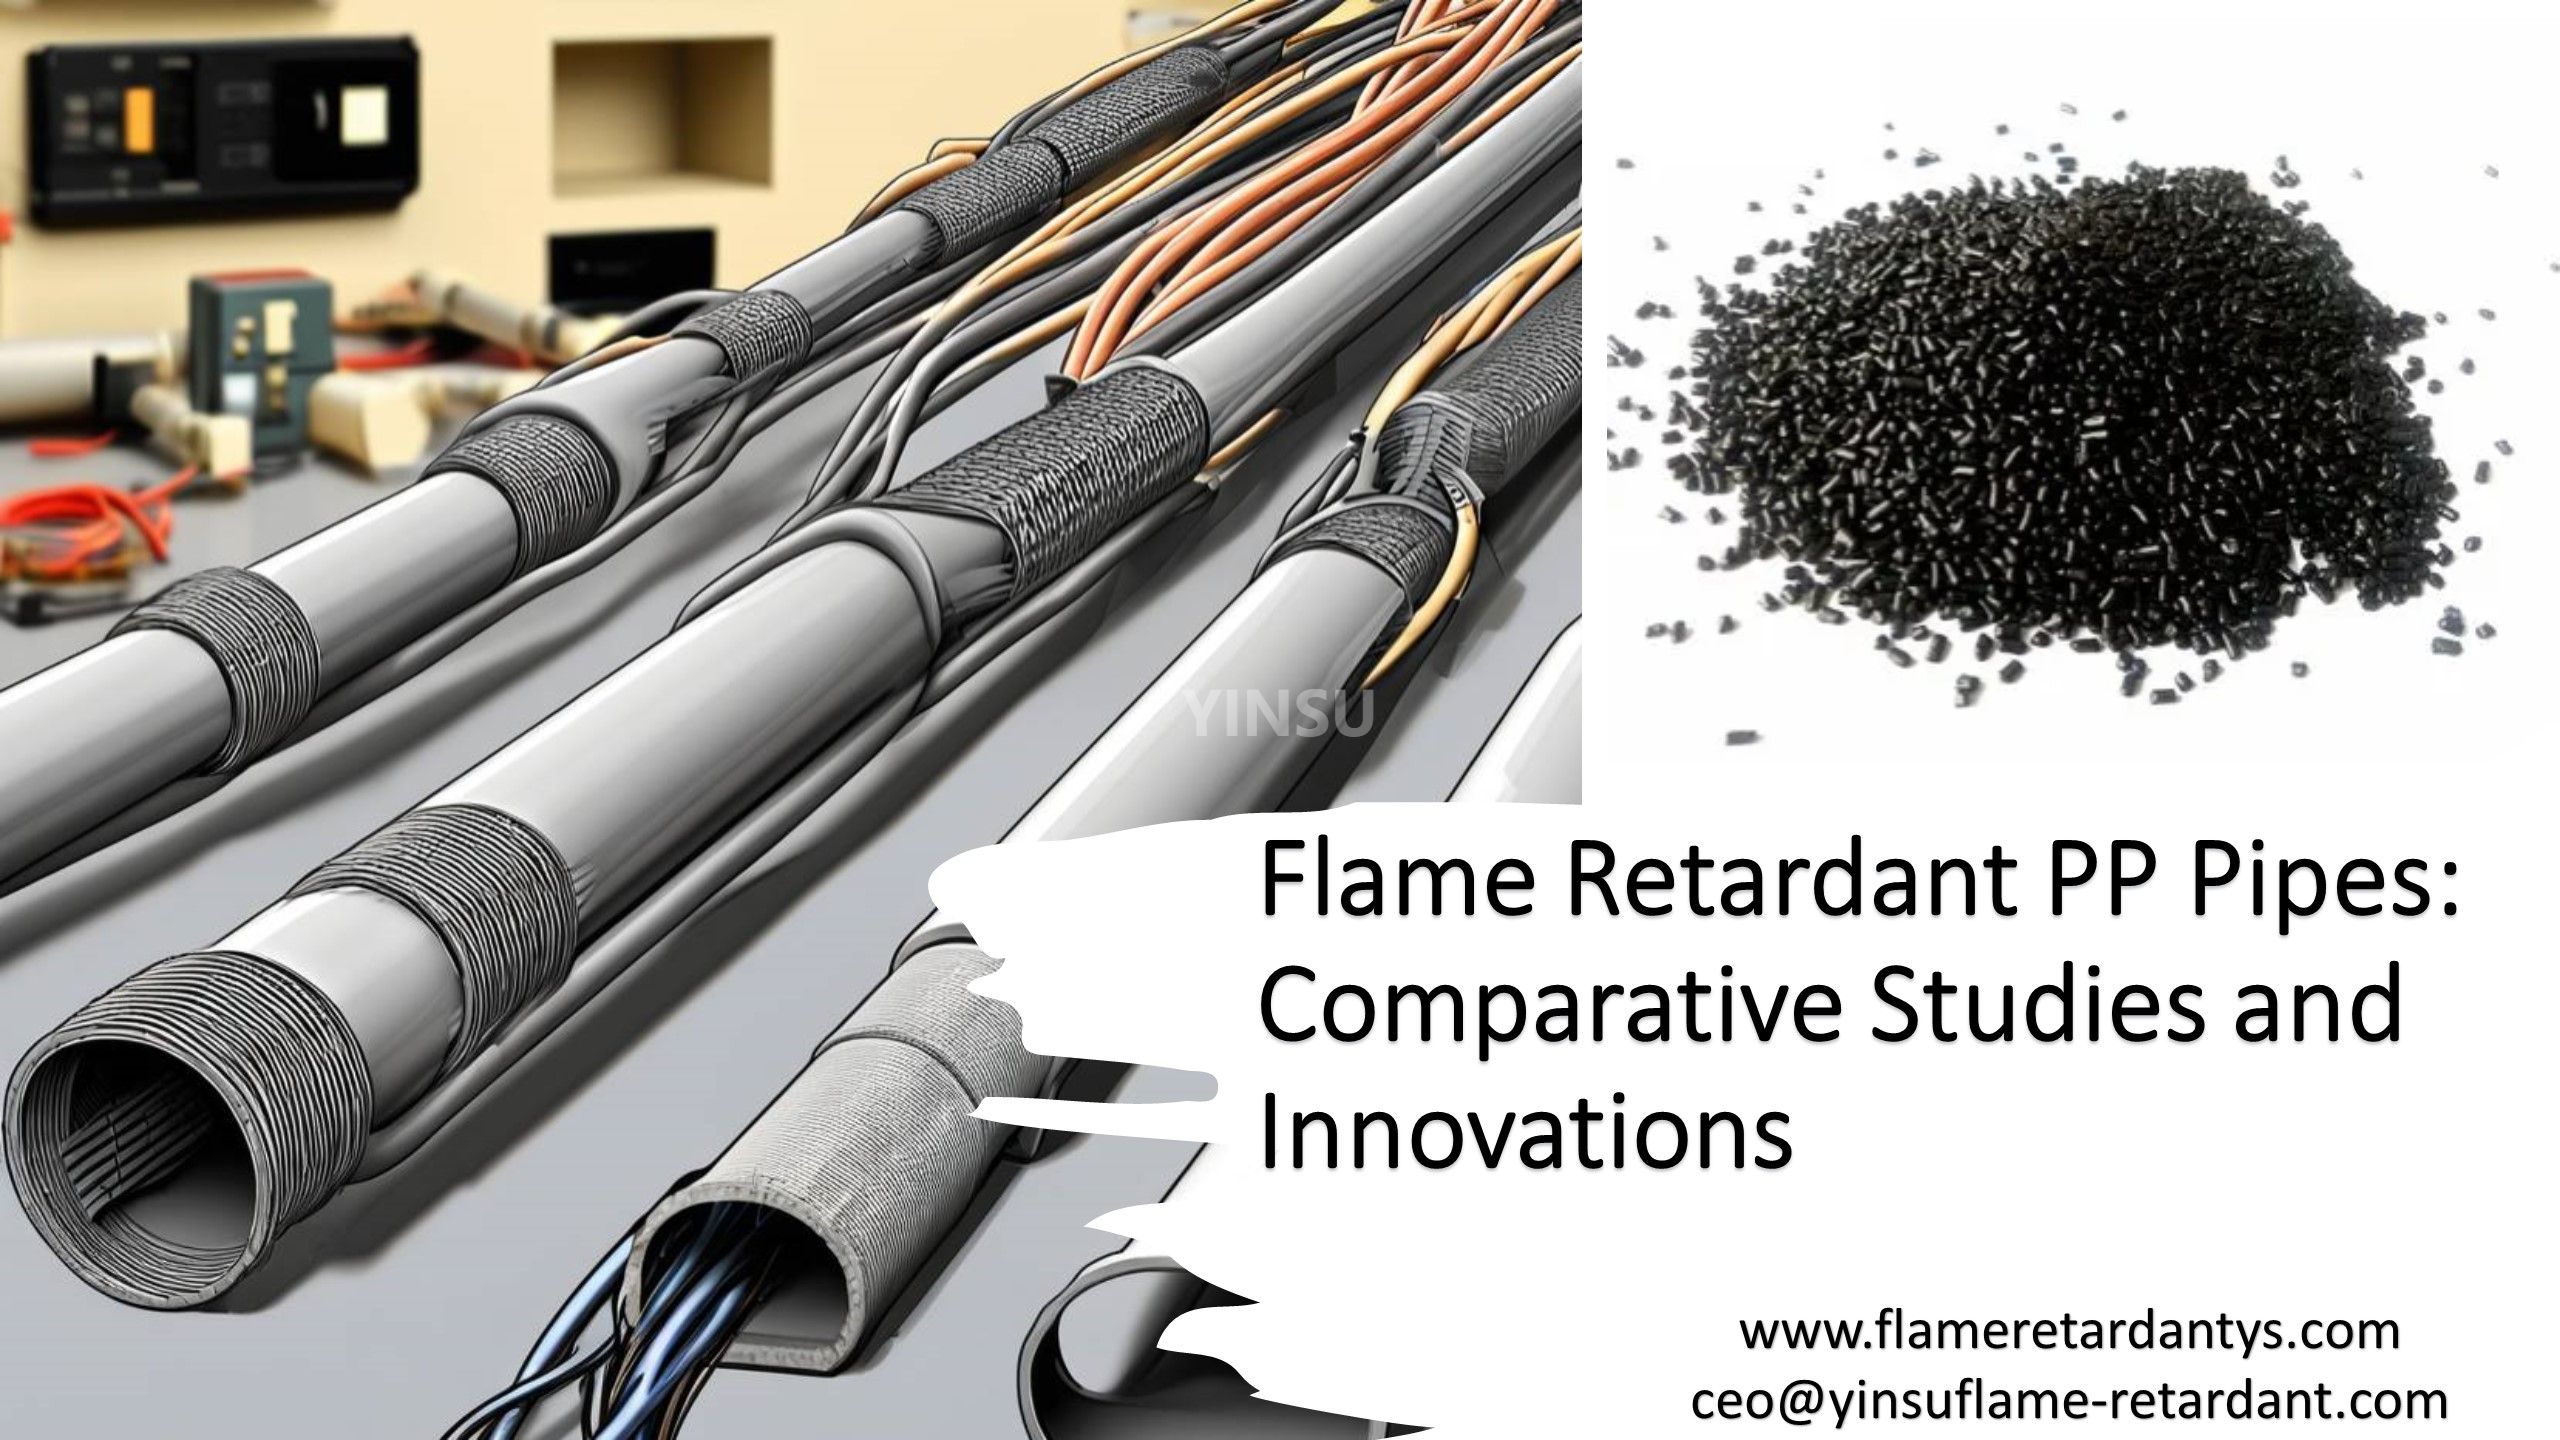 Flame Retardant PP Pipes Comparative Studies and Innovations